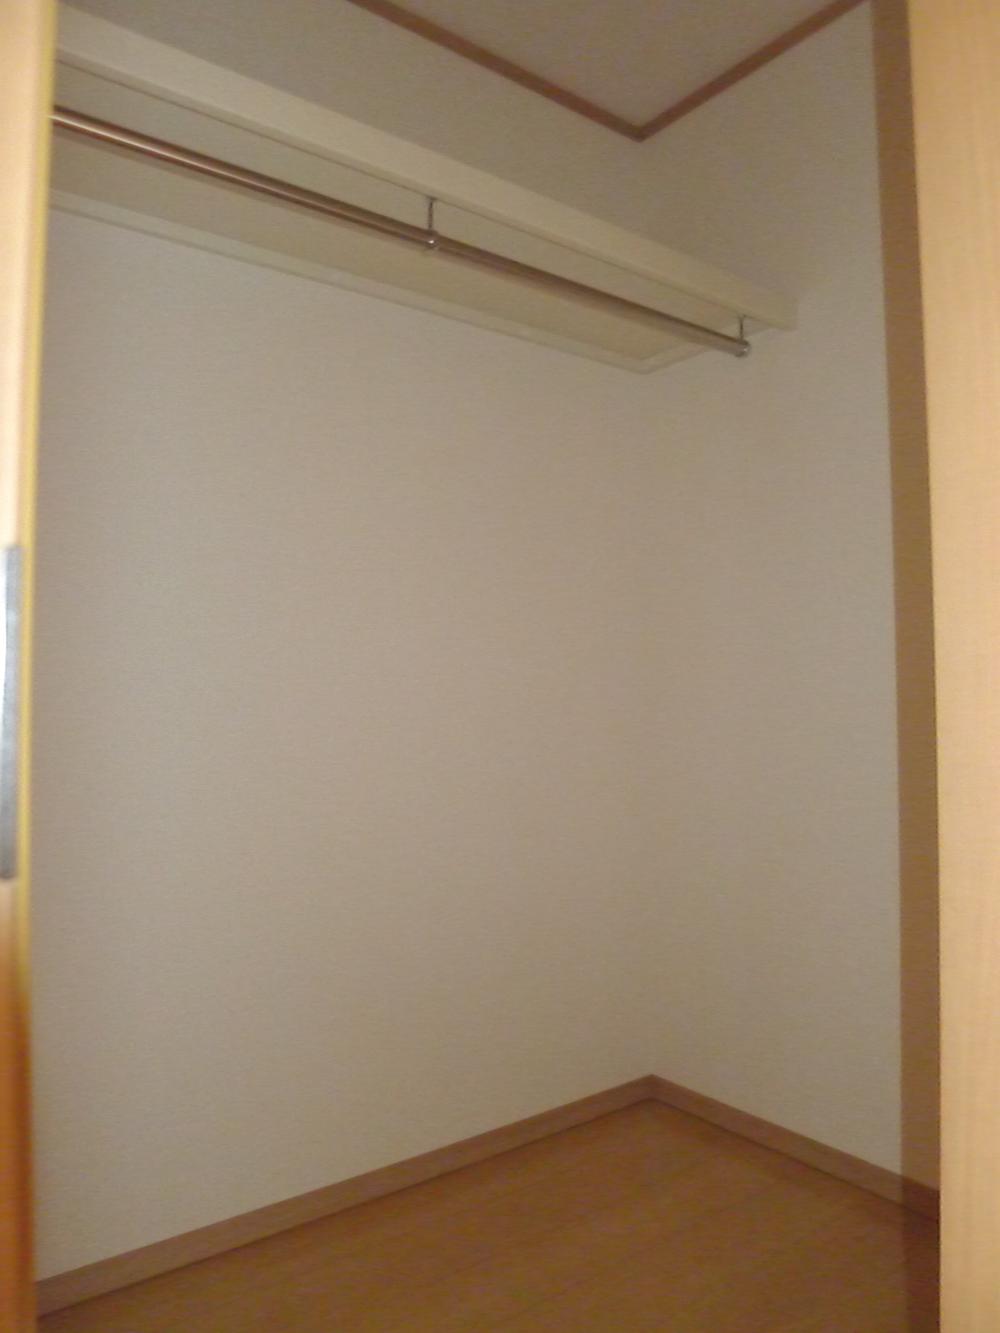 Same specifications photos (Other introspection). Walk-in closet Example of construction